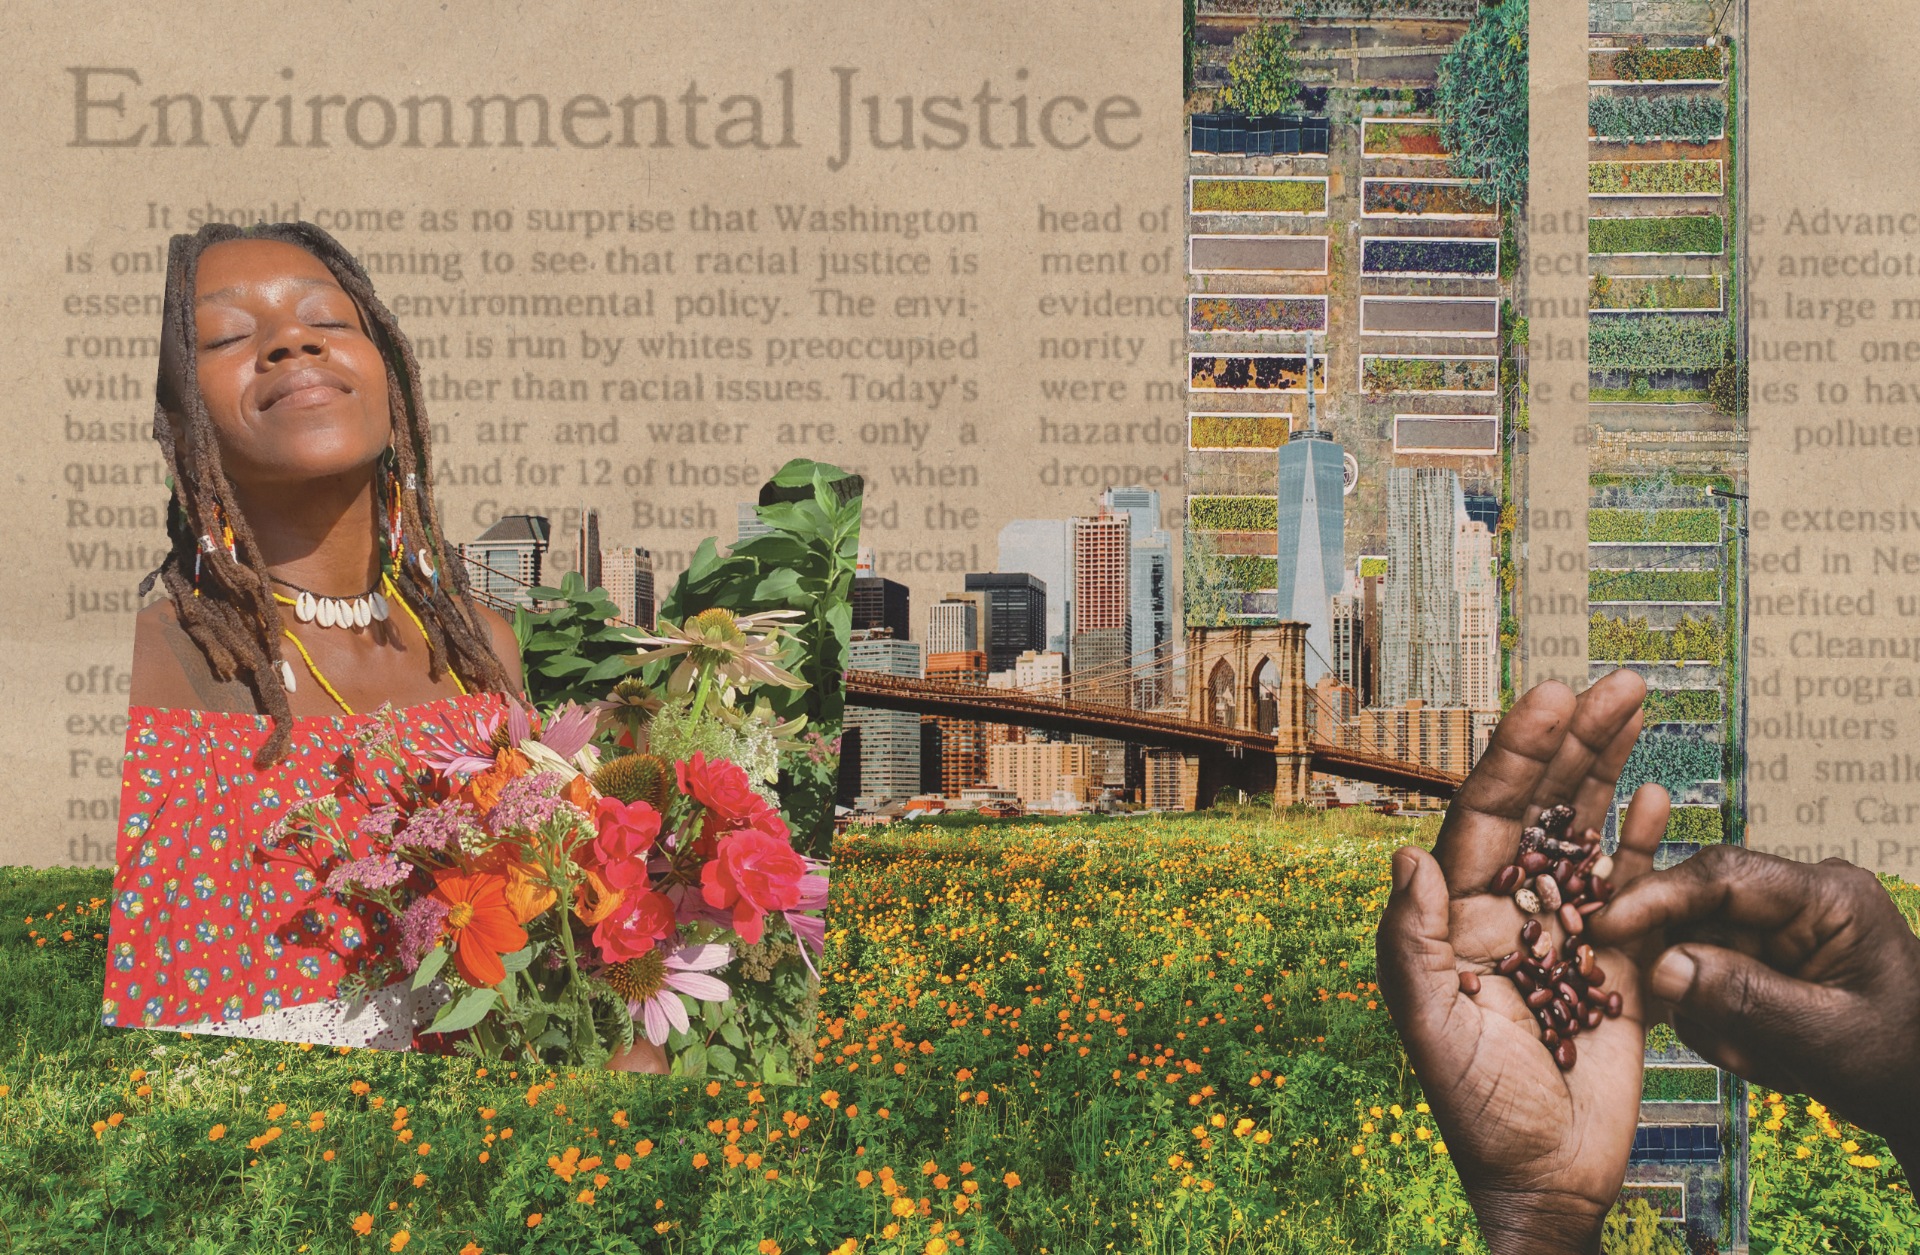 A collage of images featuring a young Black woman holding a selection of purple and pink flowers, two hands holding a handful of brown beans, images of the New York City skyline and urban garden plots, and a news article about environmental justice